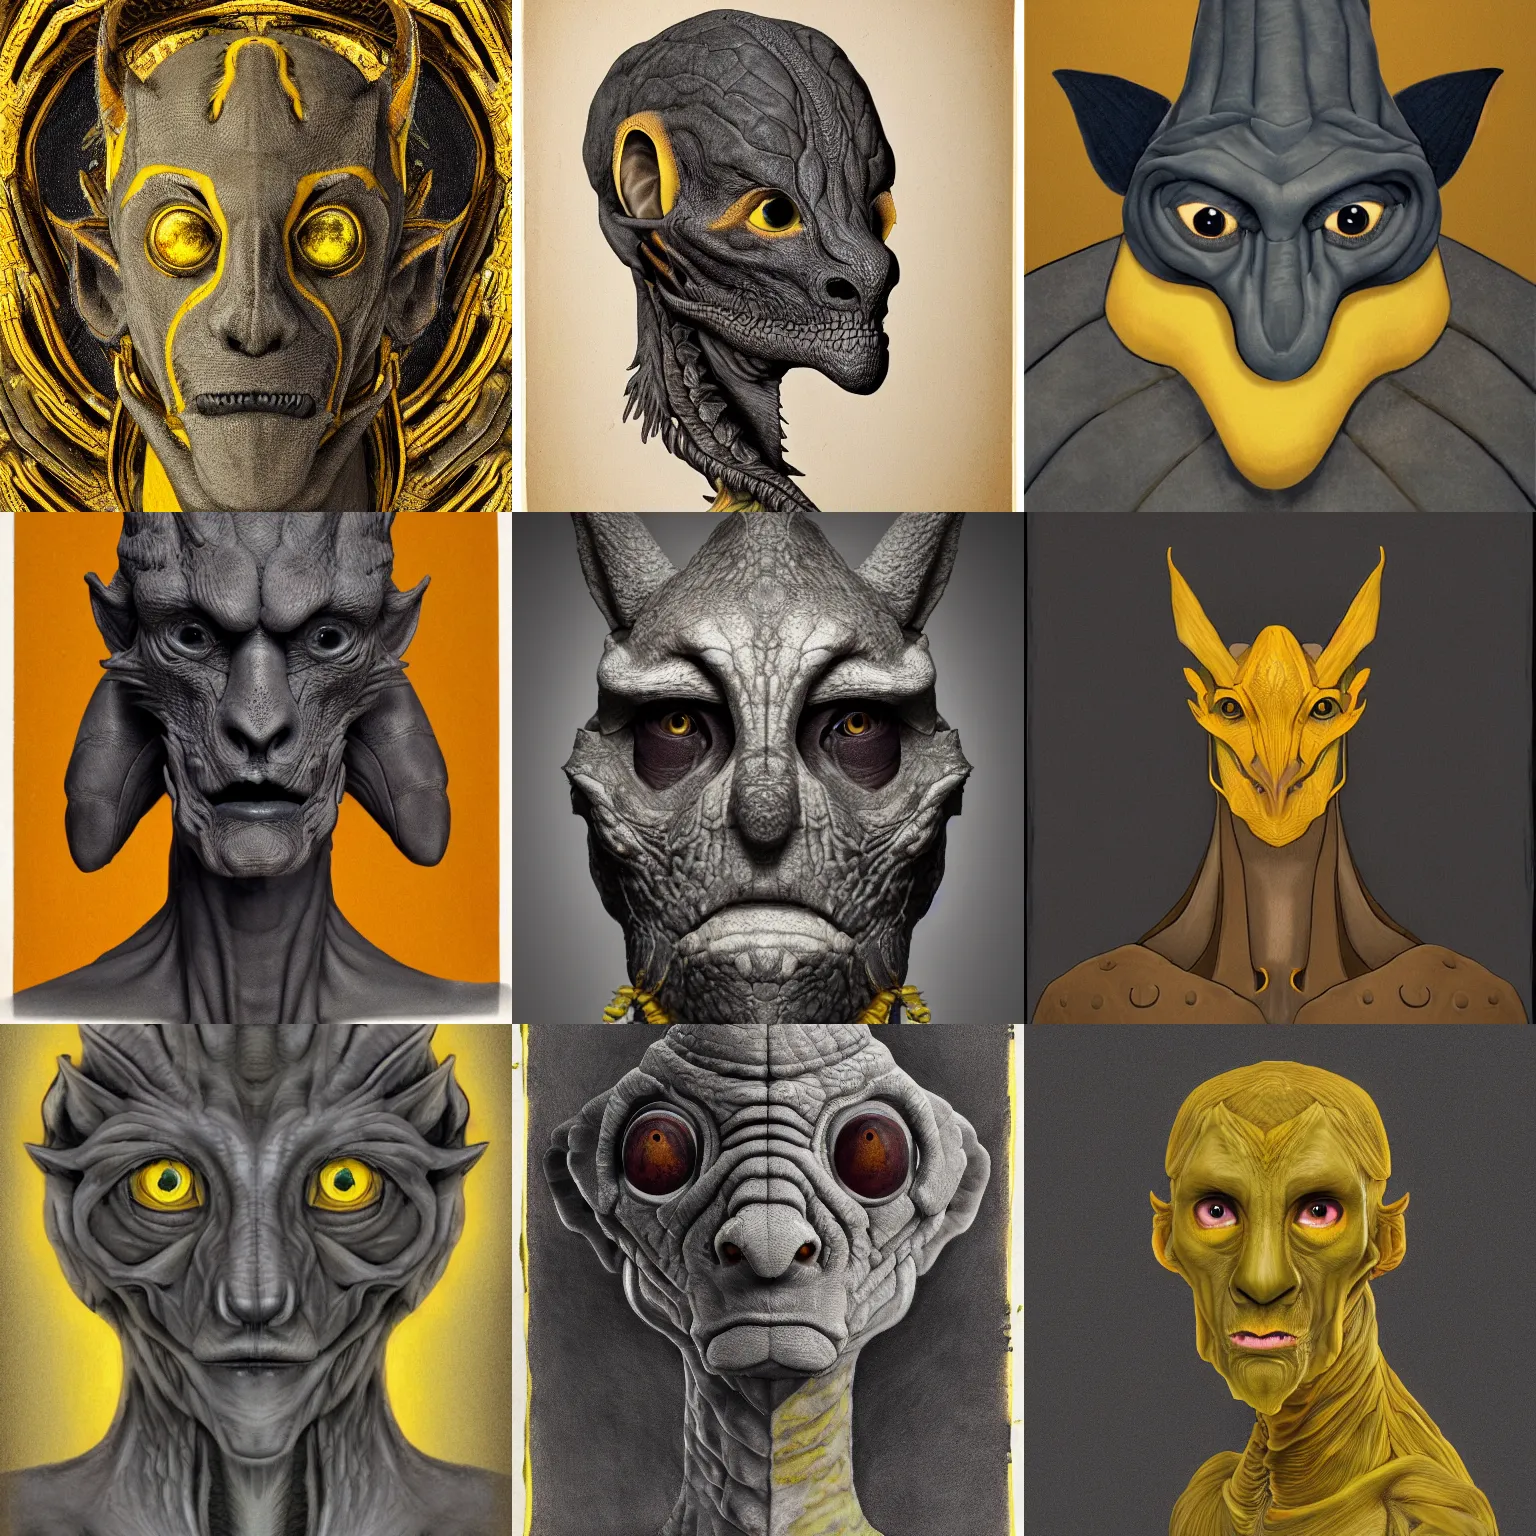 Prompt: a portrait of a very non-human character with the head of a dragon, gray leathery skin, gaunt facial structure, and yellow eyes